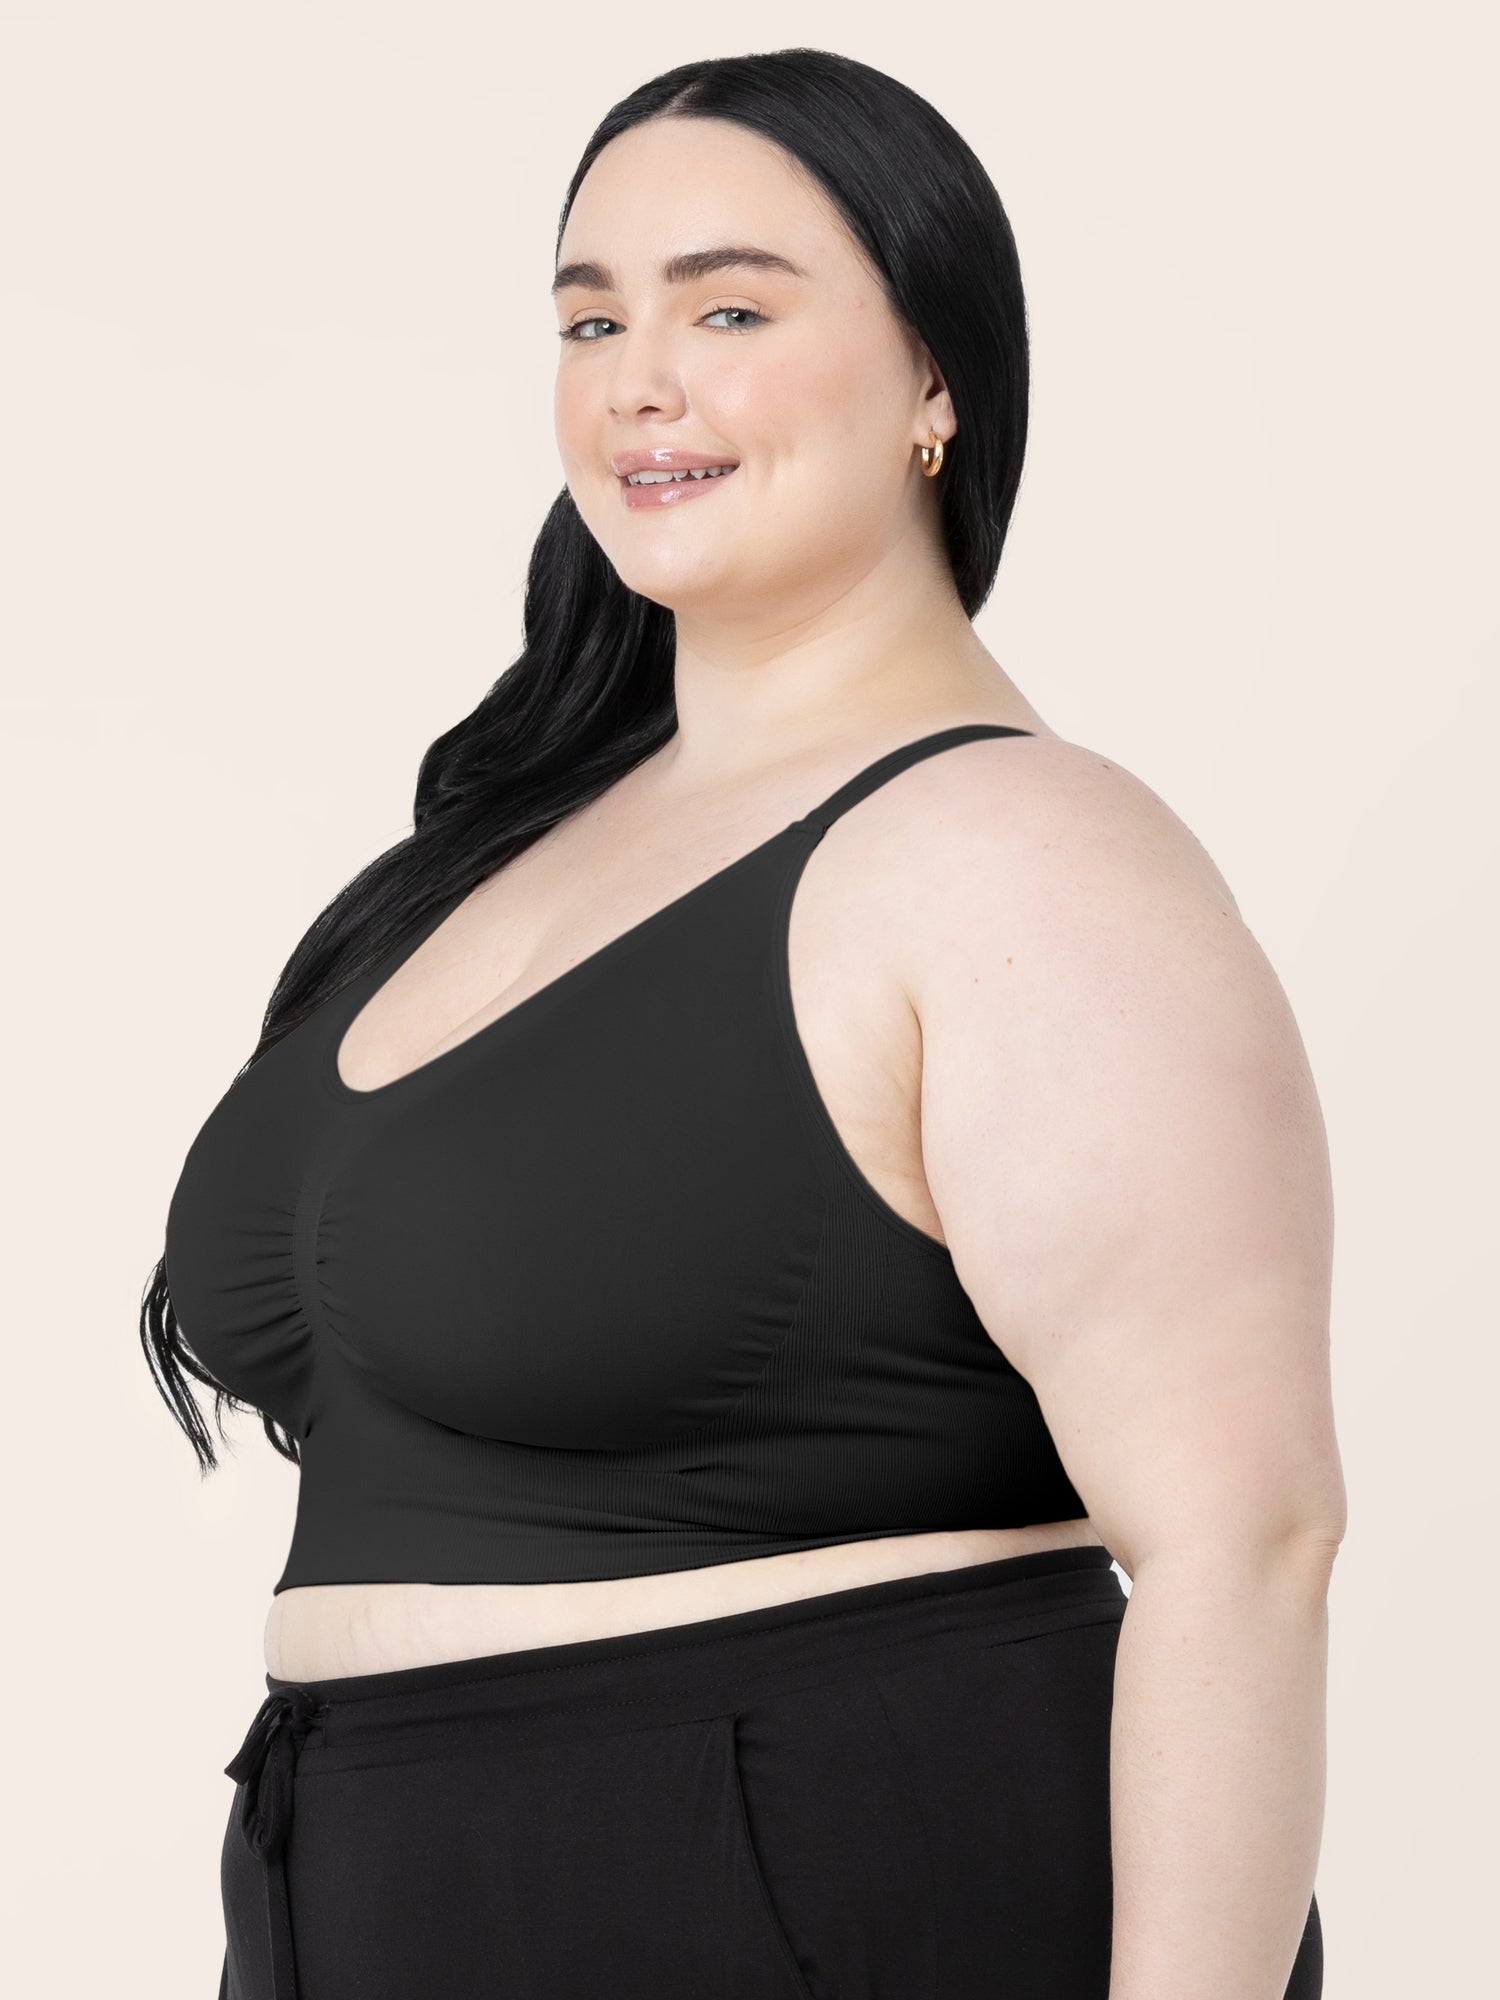 Davy Piper The Nellie Simply Wireless Busty Bra for Nepal